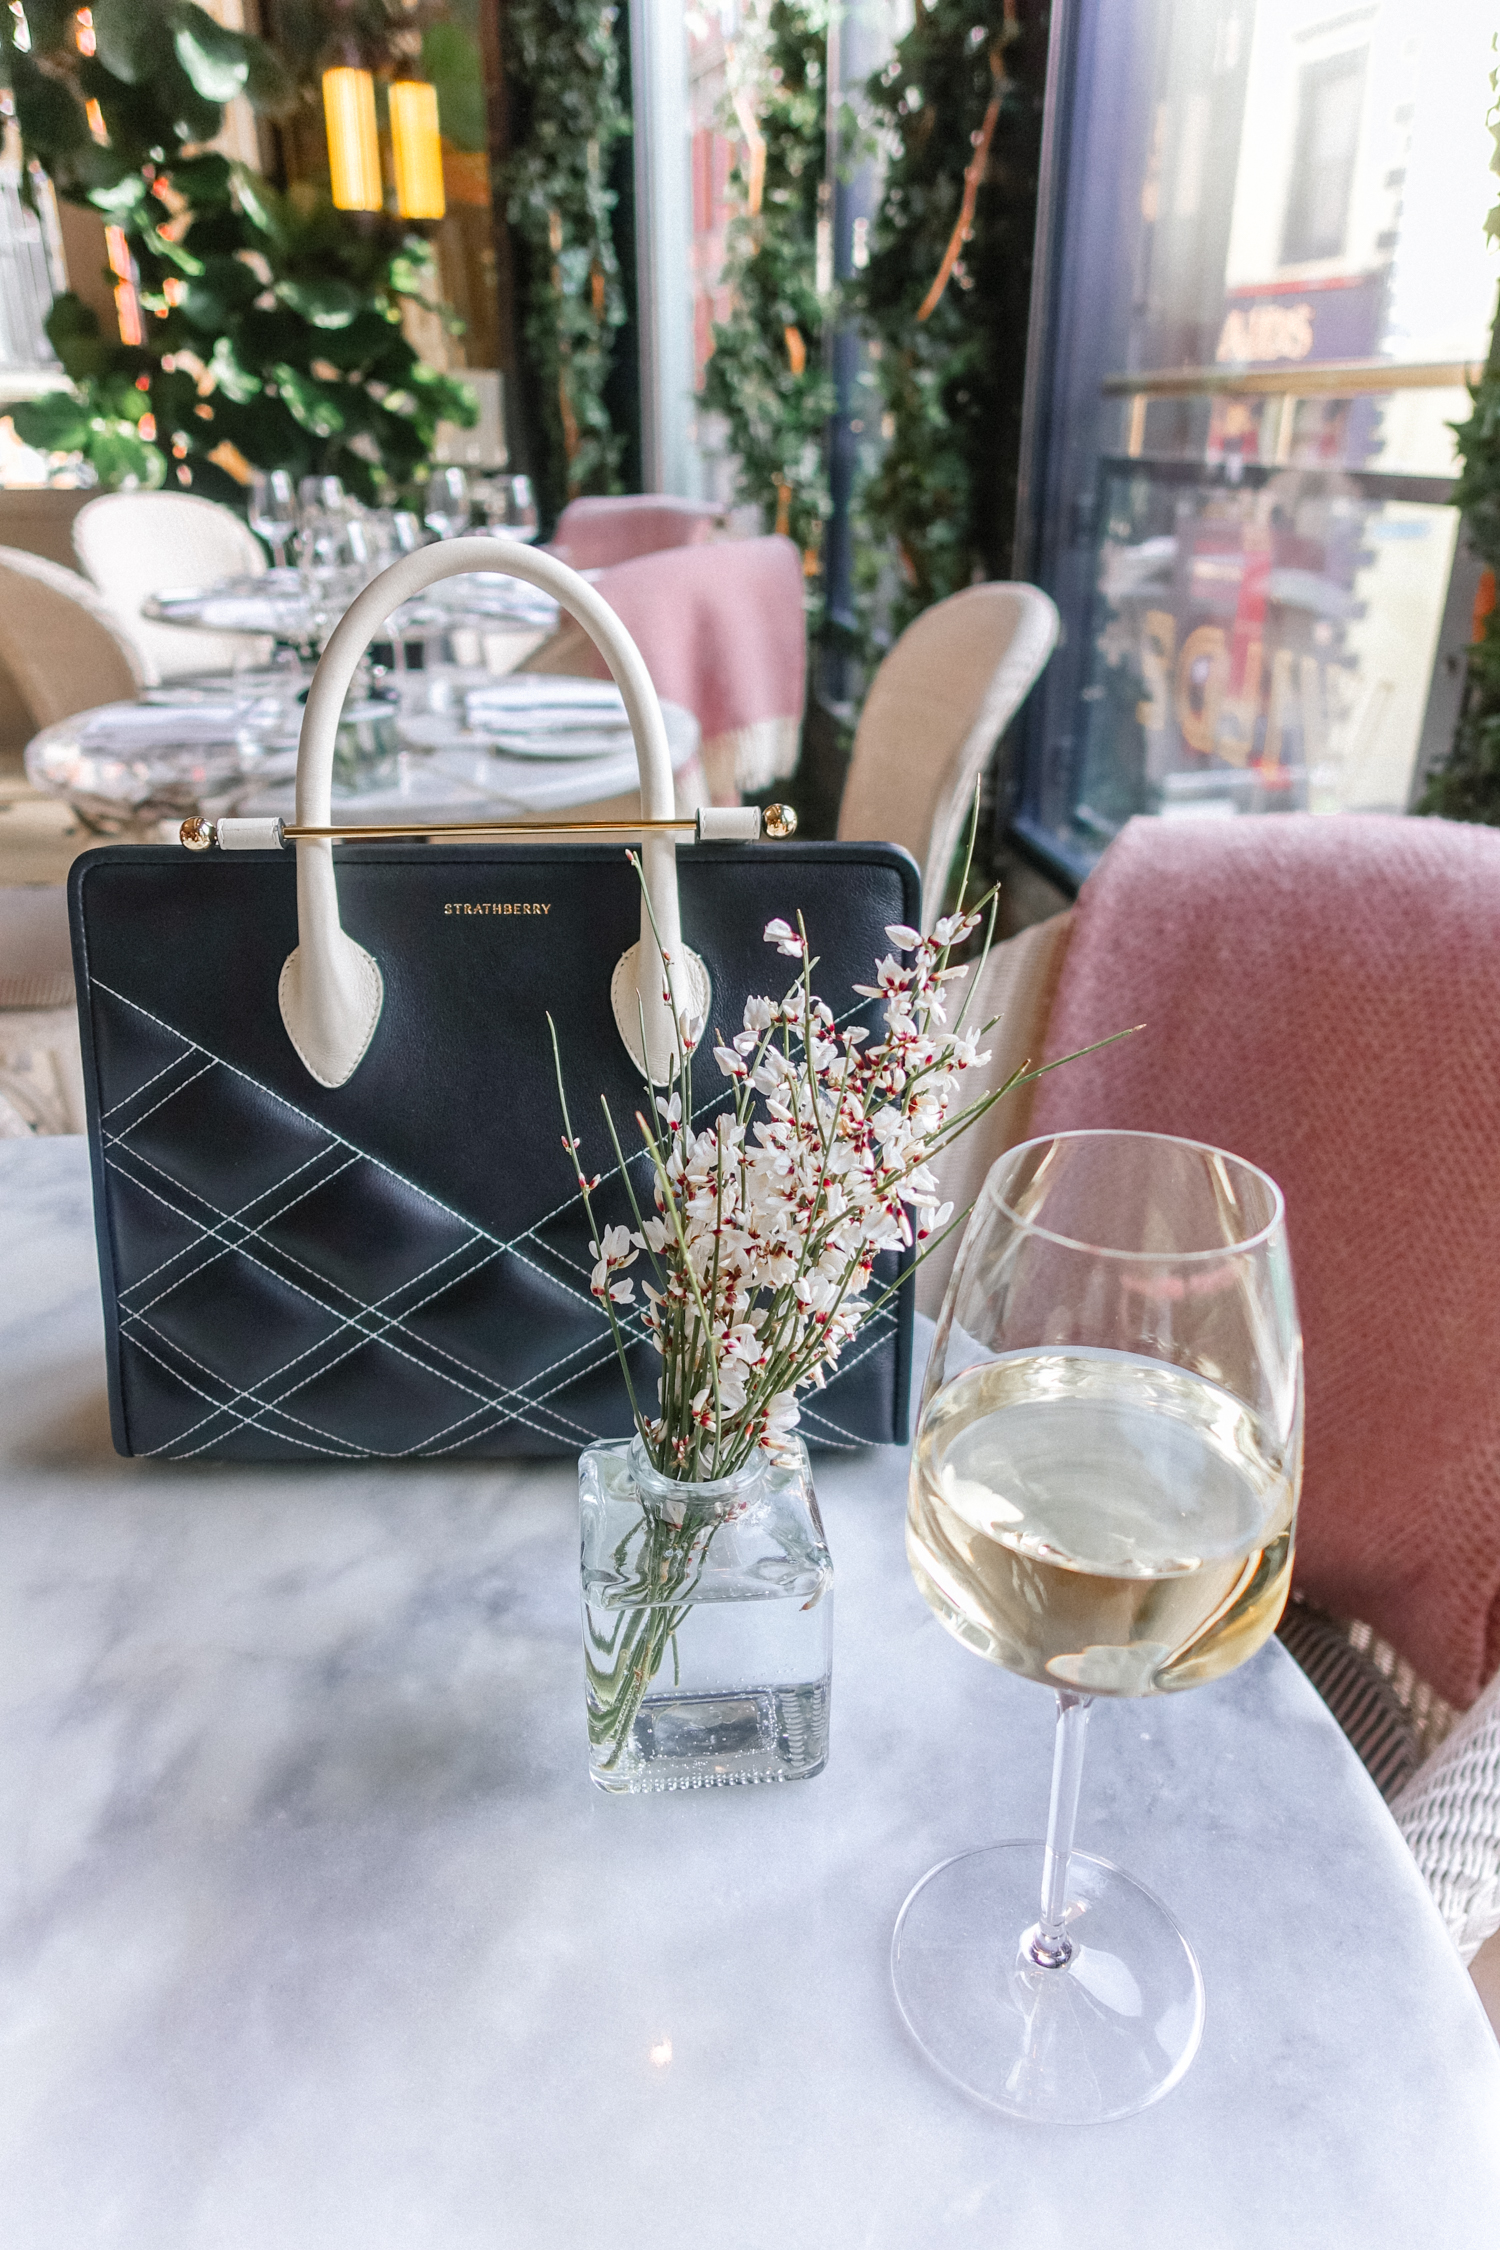 Alyssa Campanella of The A List blog visits The Westbury in Dublin, Ireland with the Strathberry Quilted Midi Tote